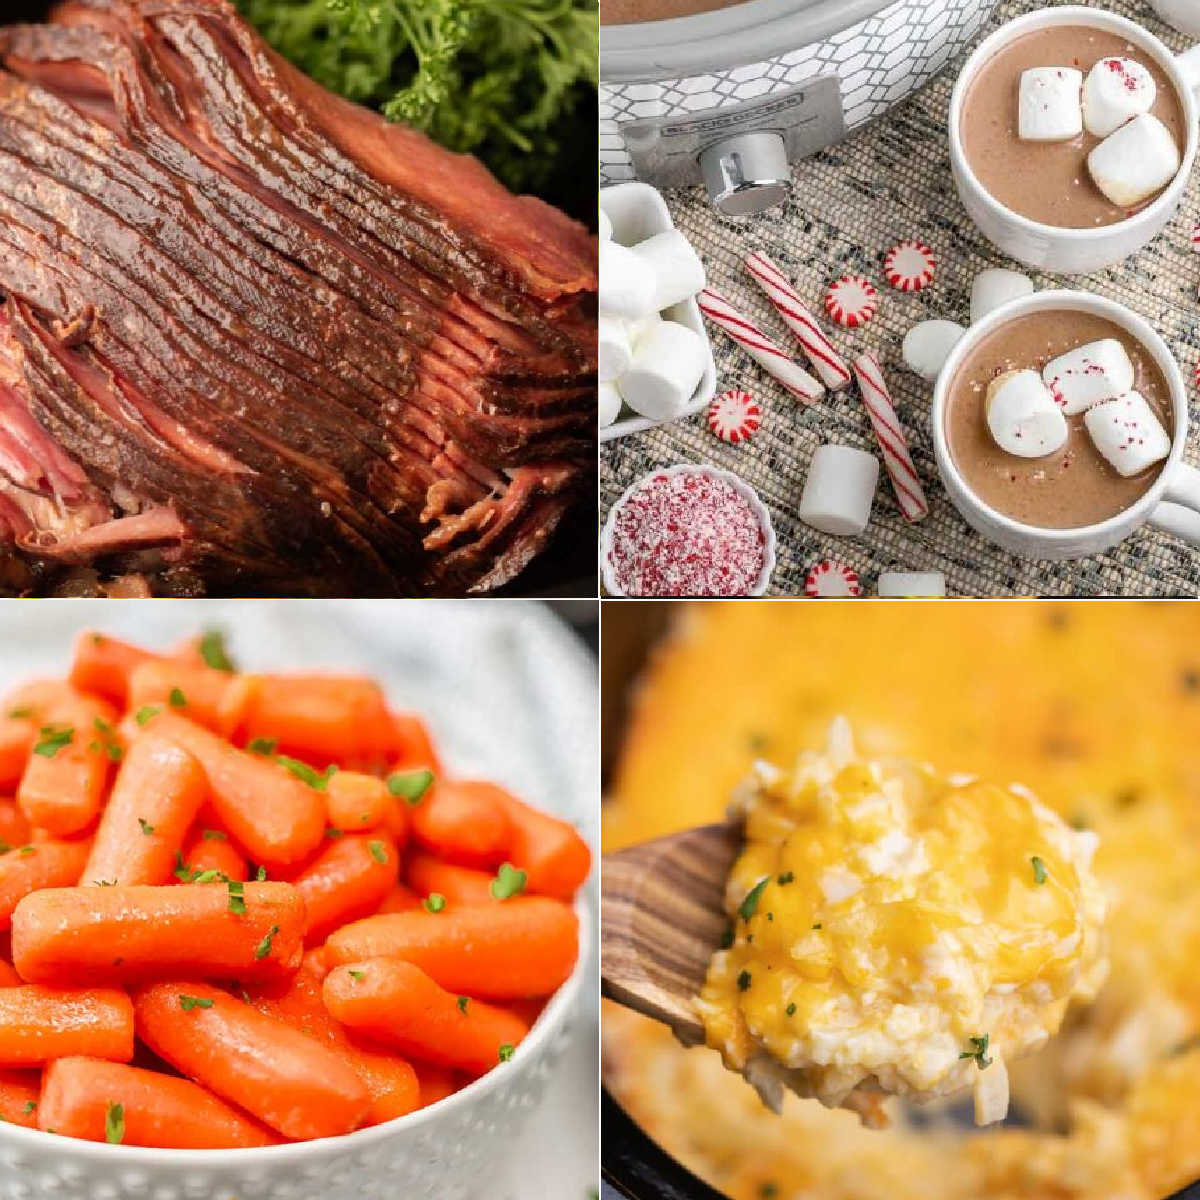 33 Slow-Cooker Christmas Recipes for the Busy Holiday Season